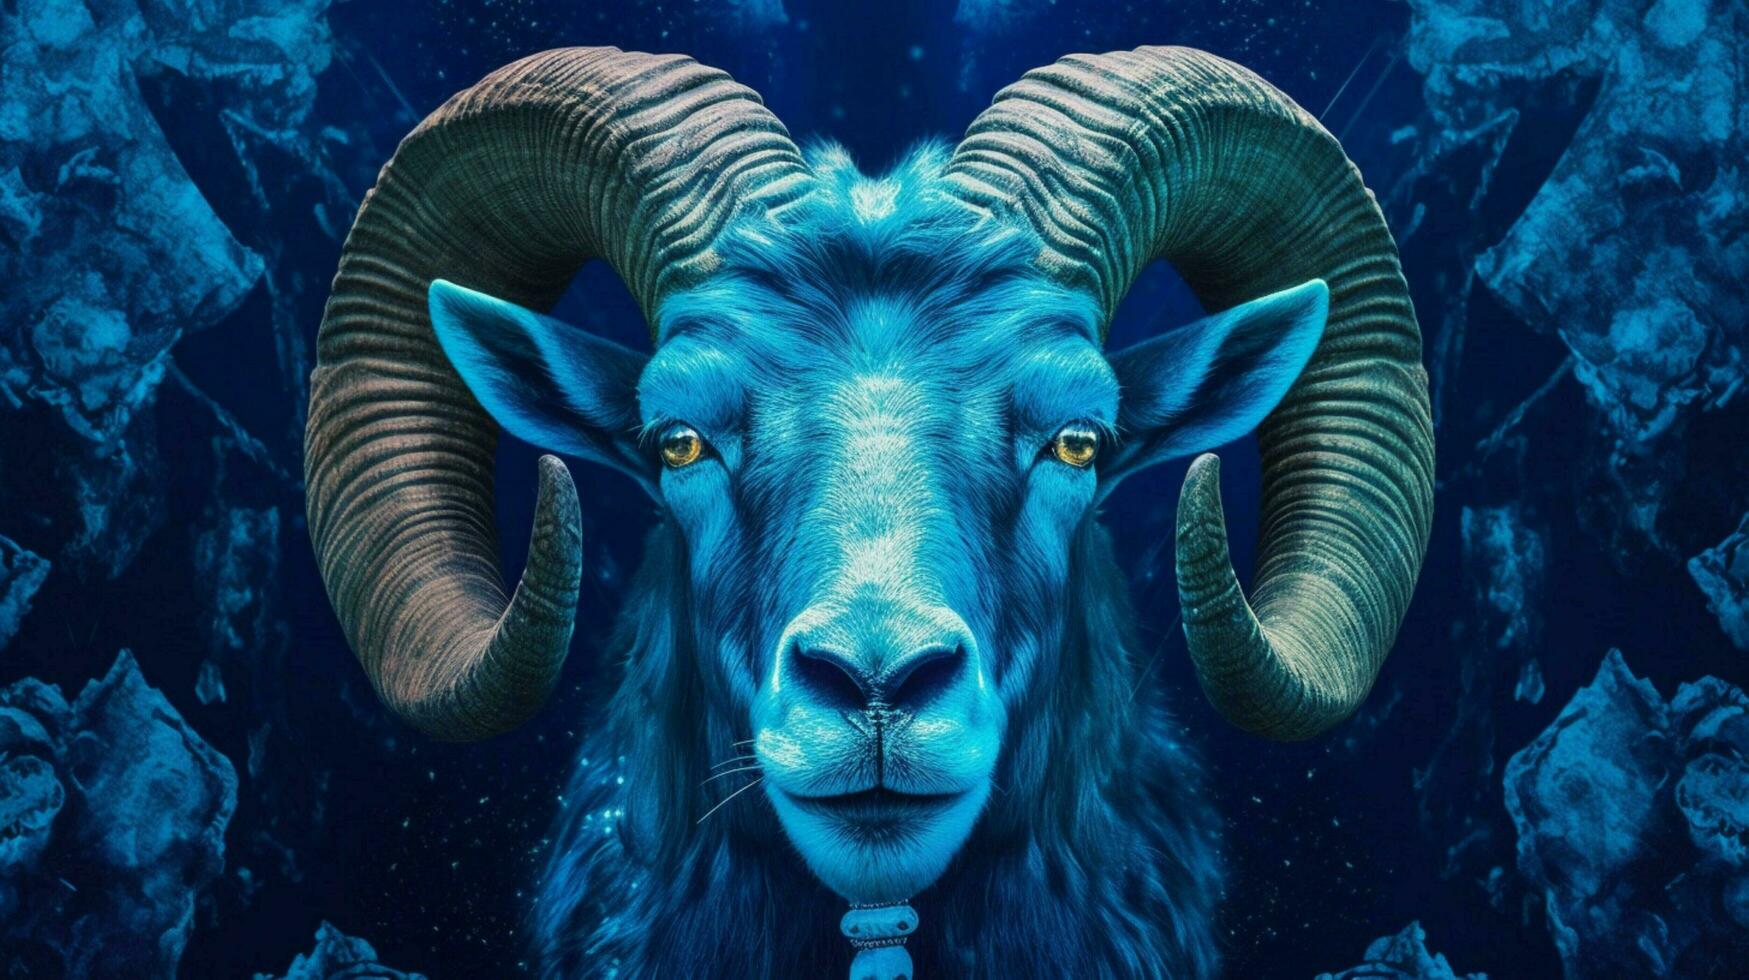 a blue poster with a goats face photo